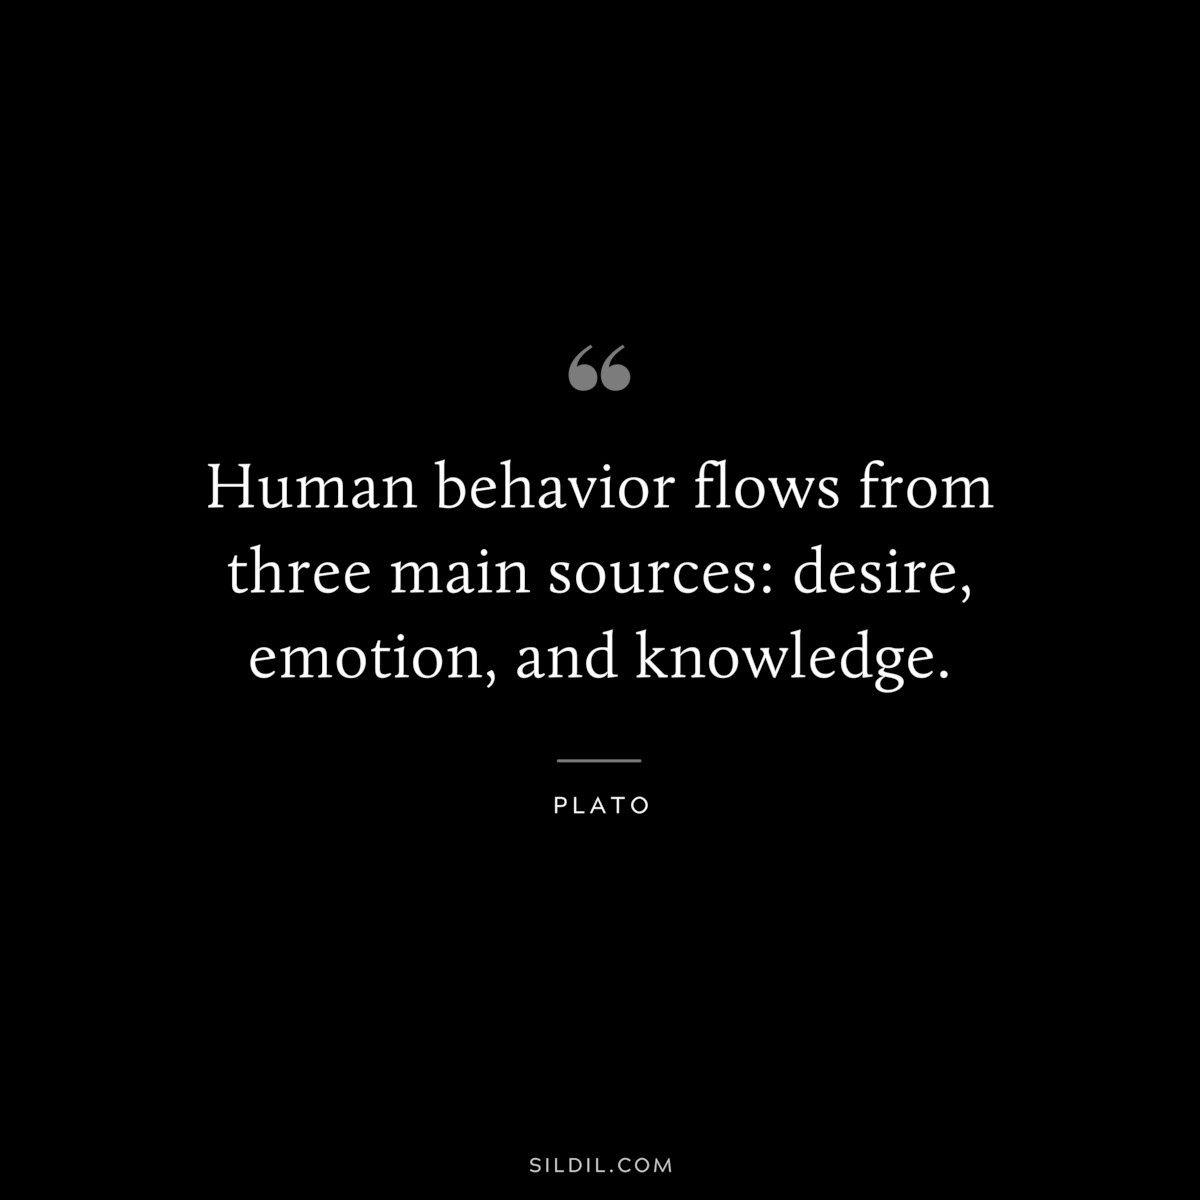 Human behavior flows from three main sources: desire, emotion, and knowledge. ― Plato